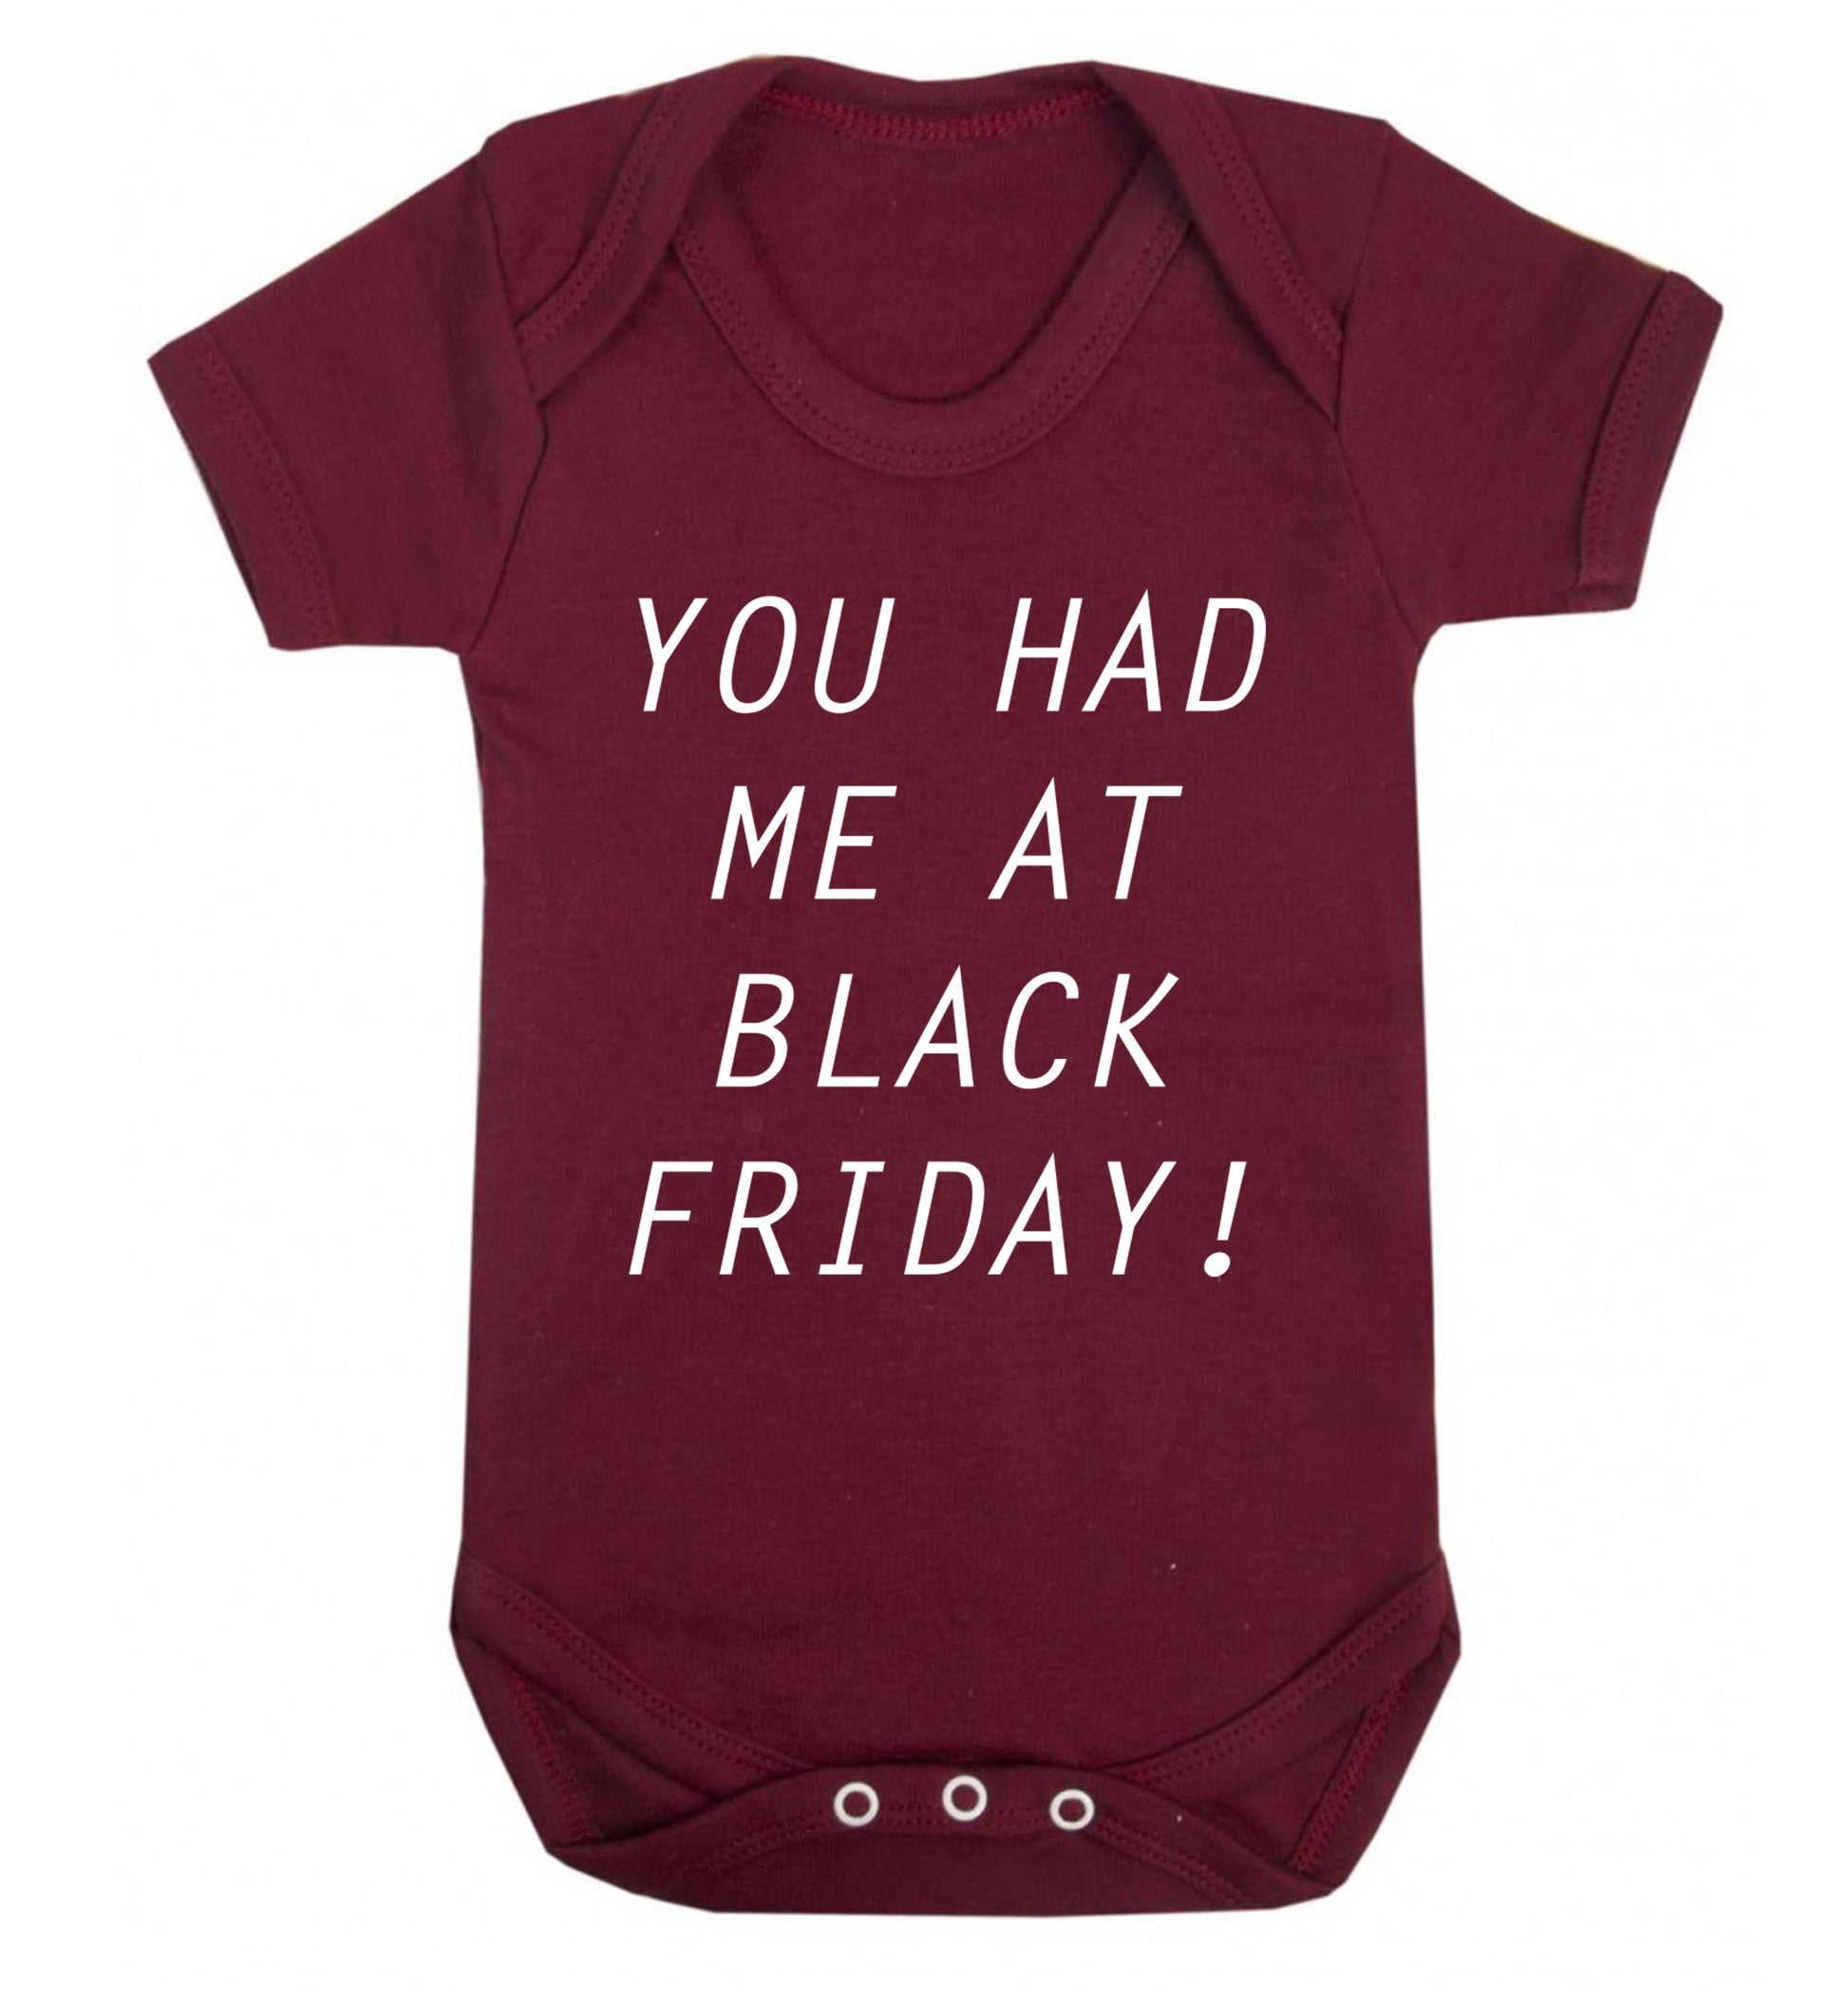 You had me at black friday Baby Vest maroon 18-24 months